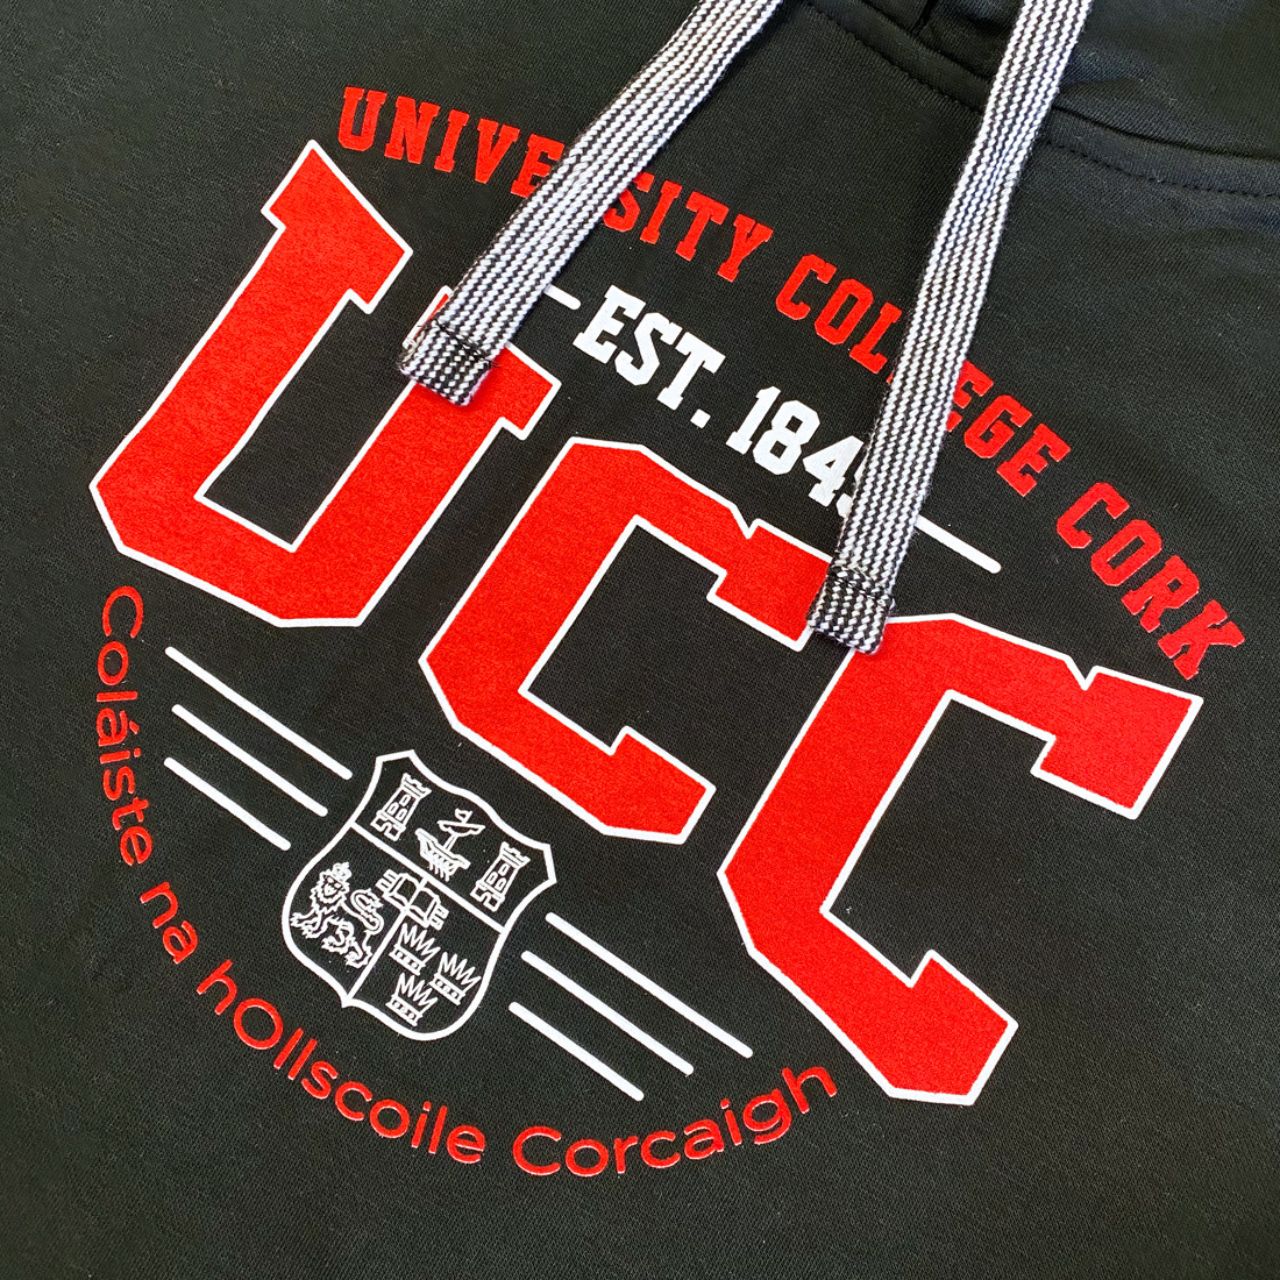 This UCC College Hoodie Est 1845 - Black is an official addition to the collection. Its relaxed fit showcases a printed UCC crest, UCC back neck label, contrasting draw strings, and a pocket with a UCC woven label.